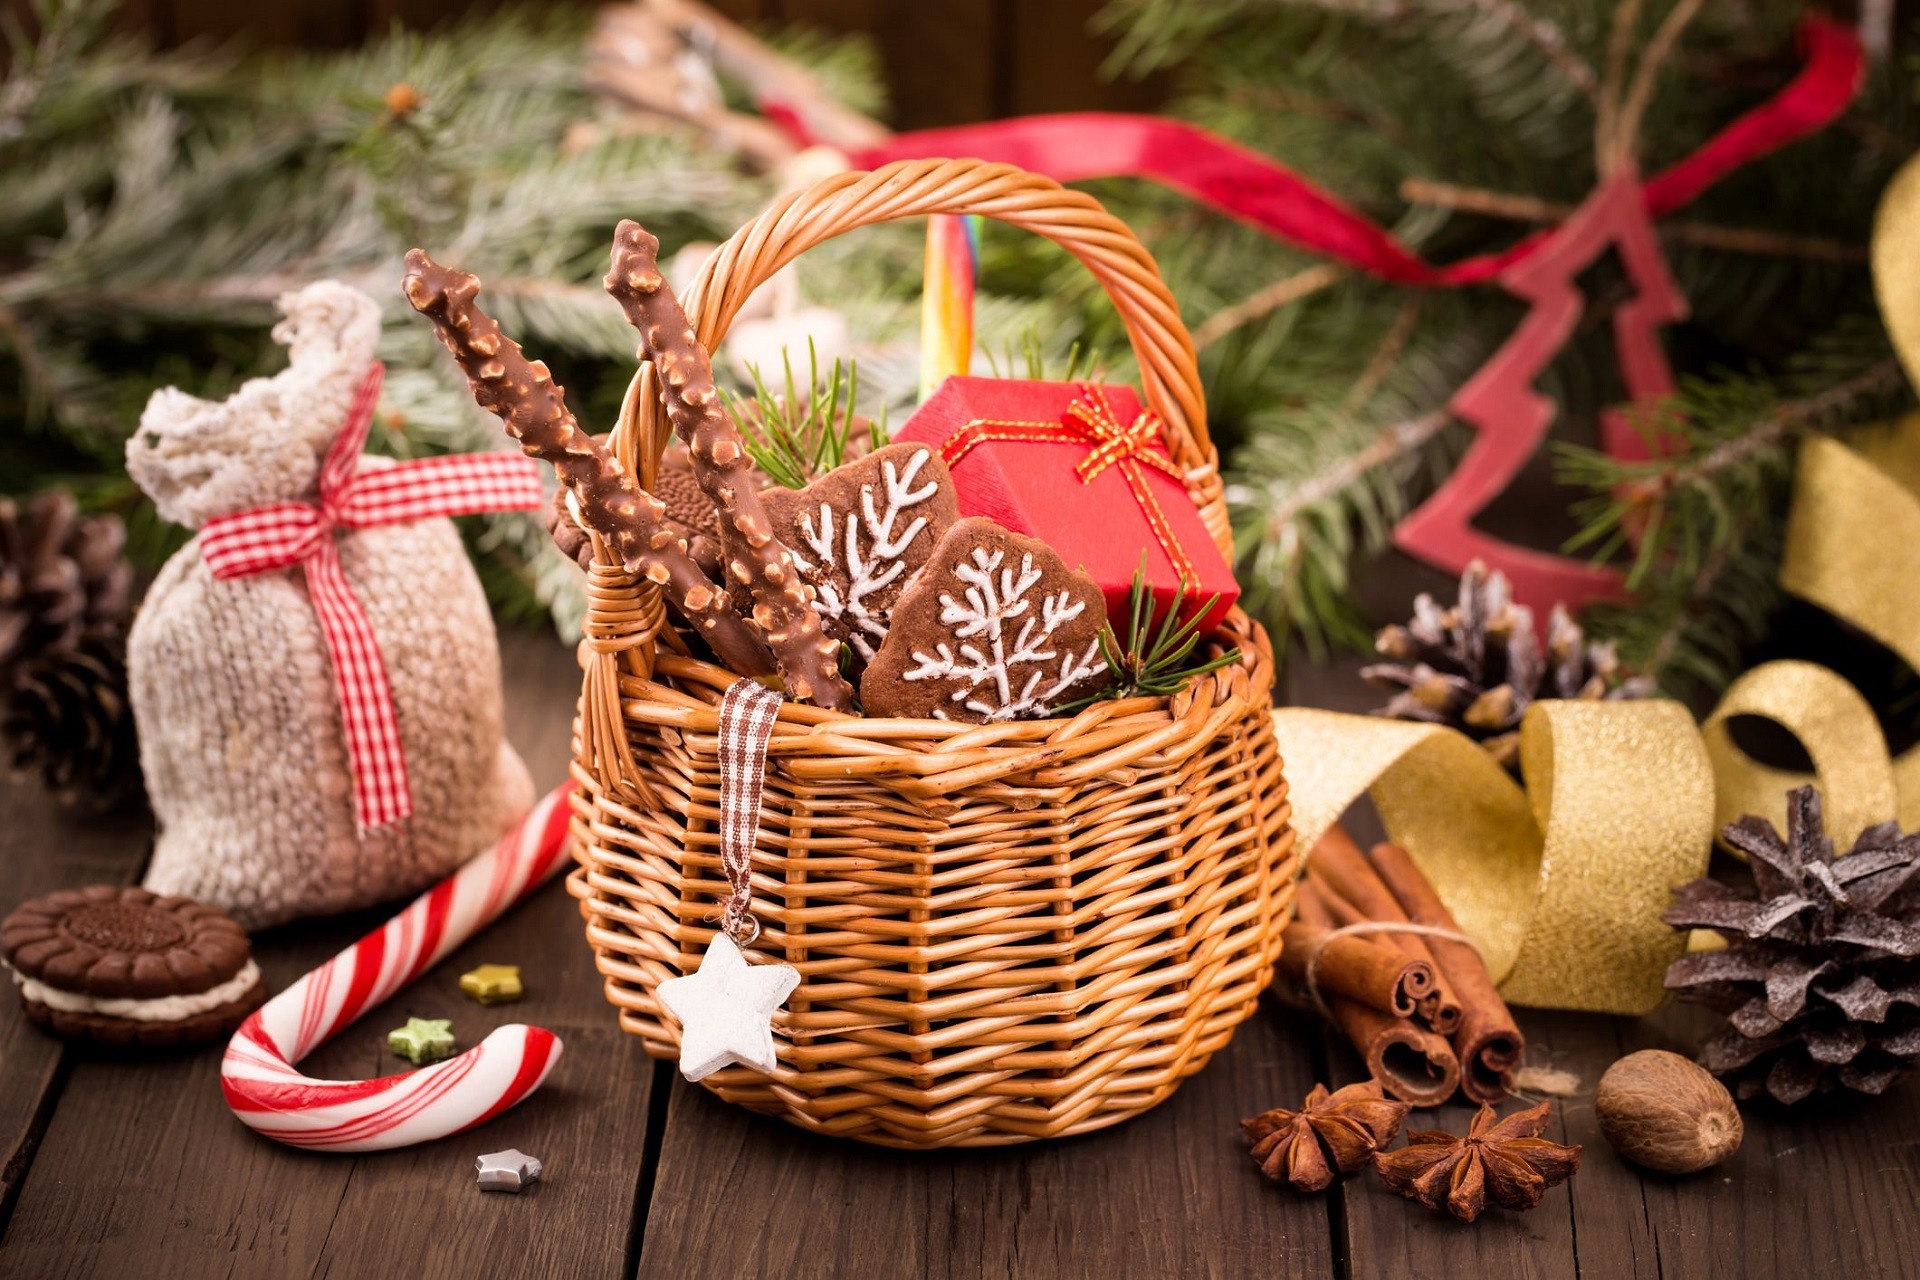 7 Great Things to Add to Your Christmas Gift Basket